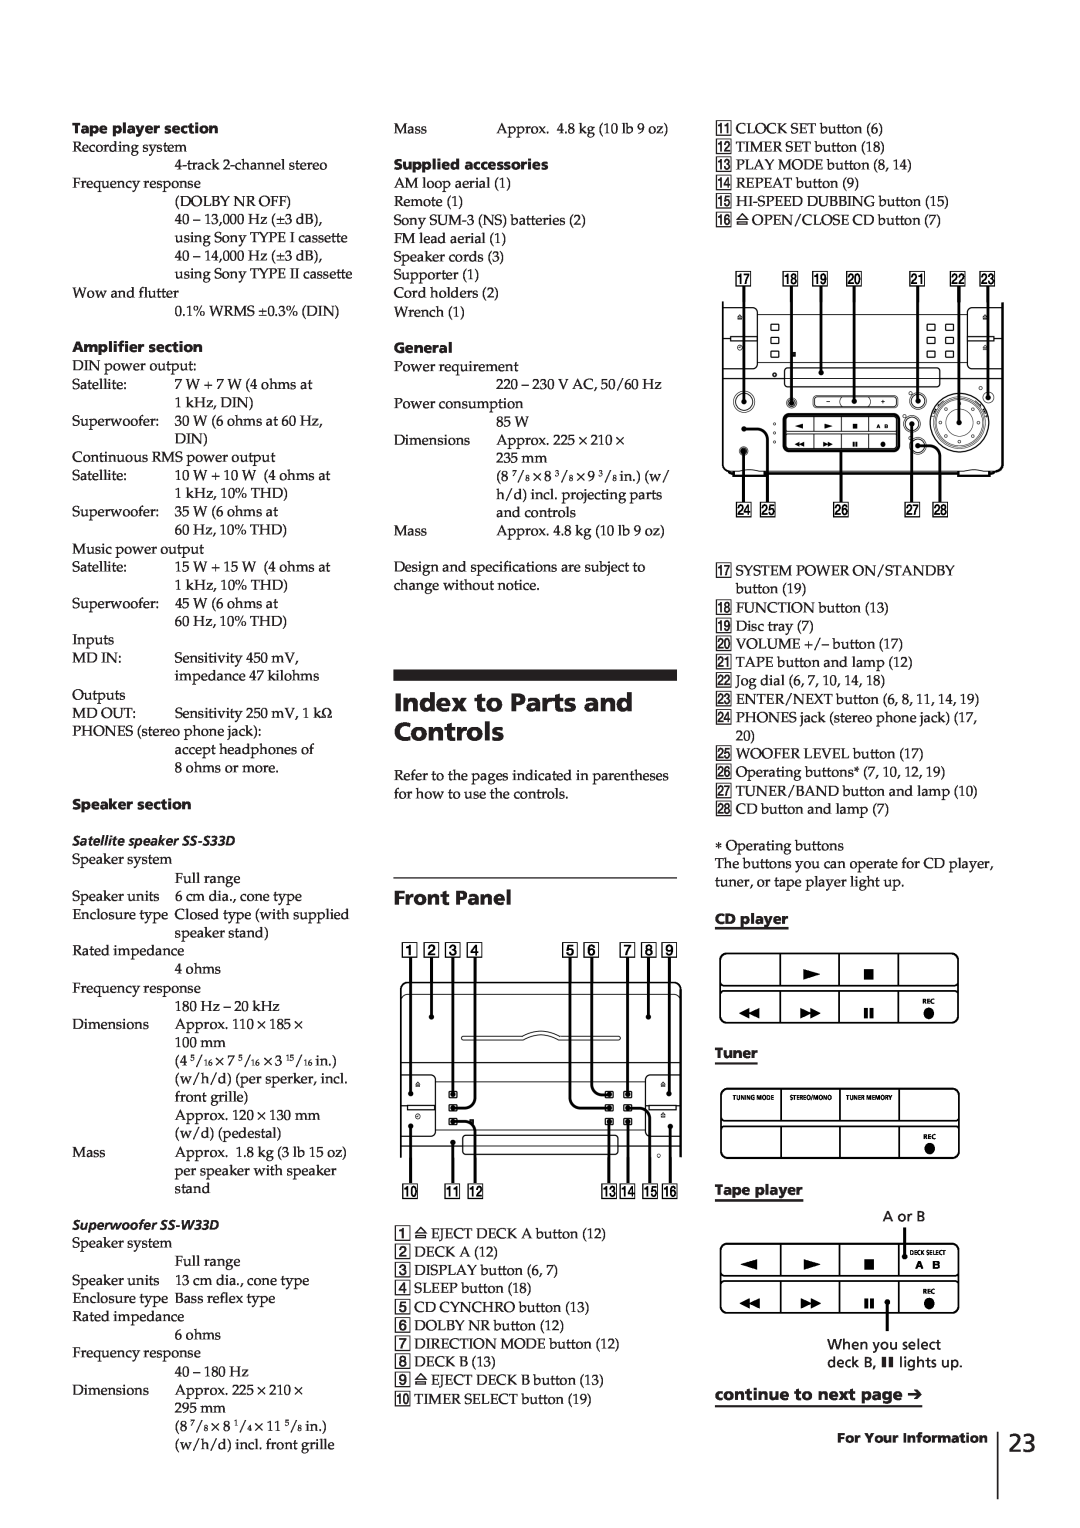 Sony CHC-P33D operating instructions Index to Parts and Controls, Front Panel, continue to next page 